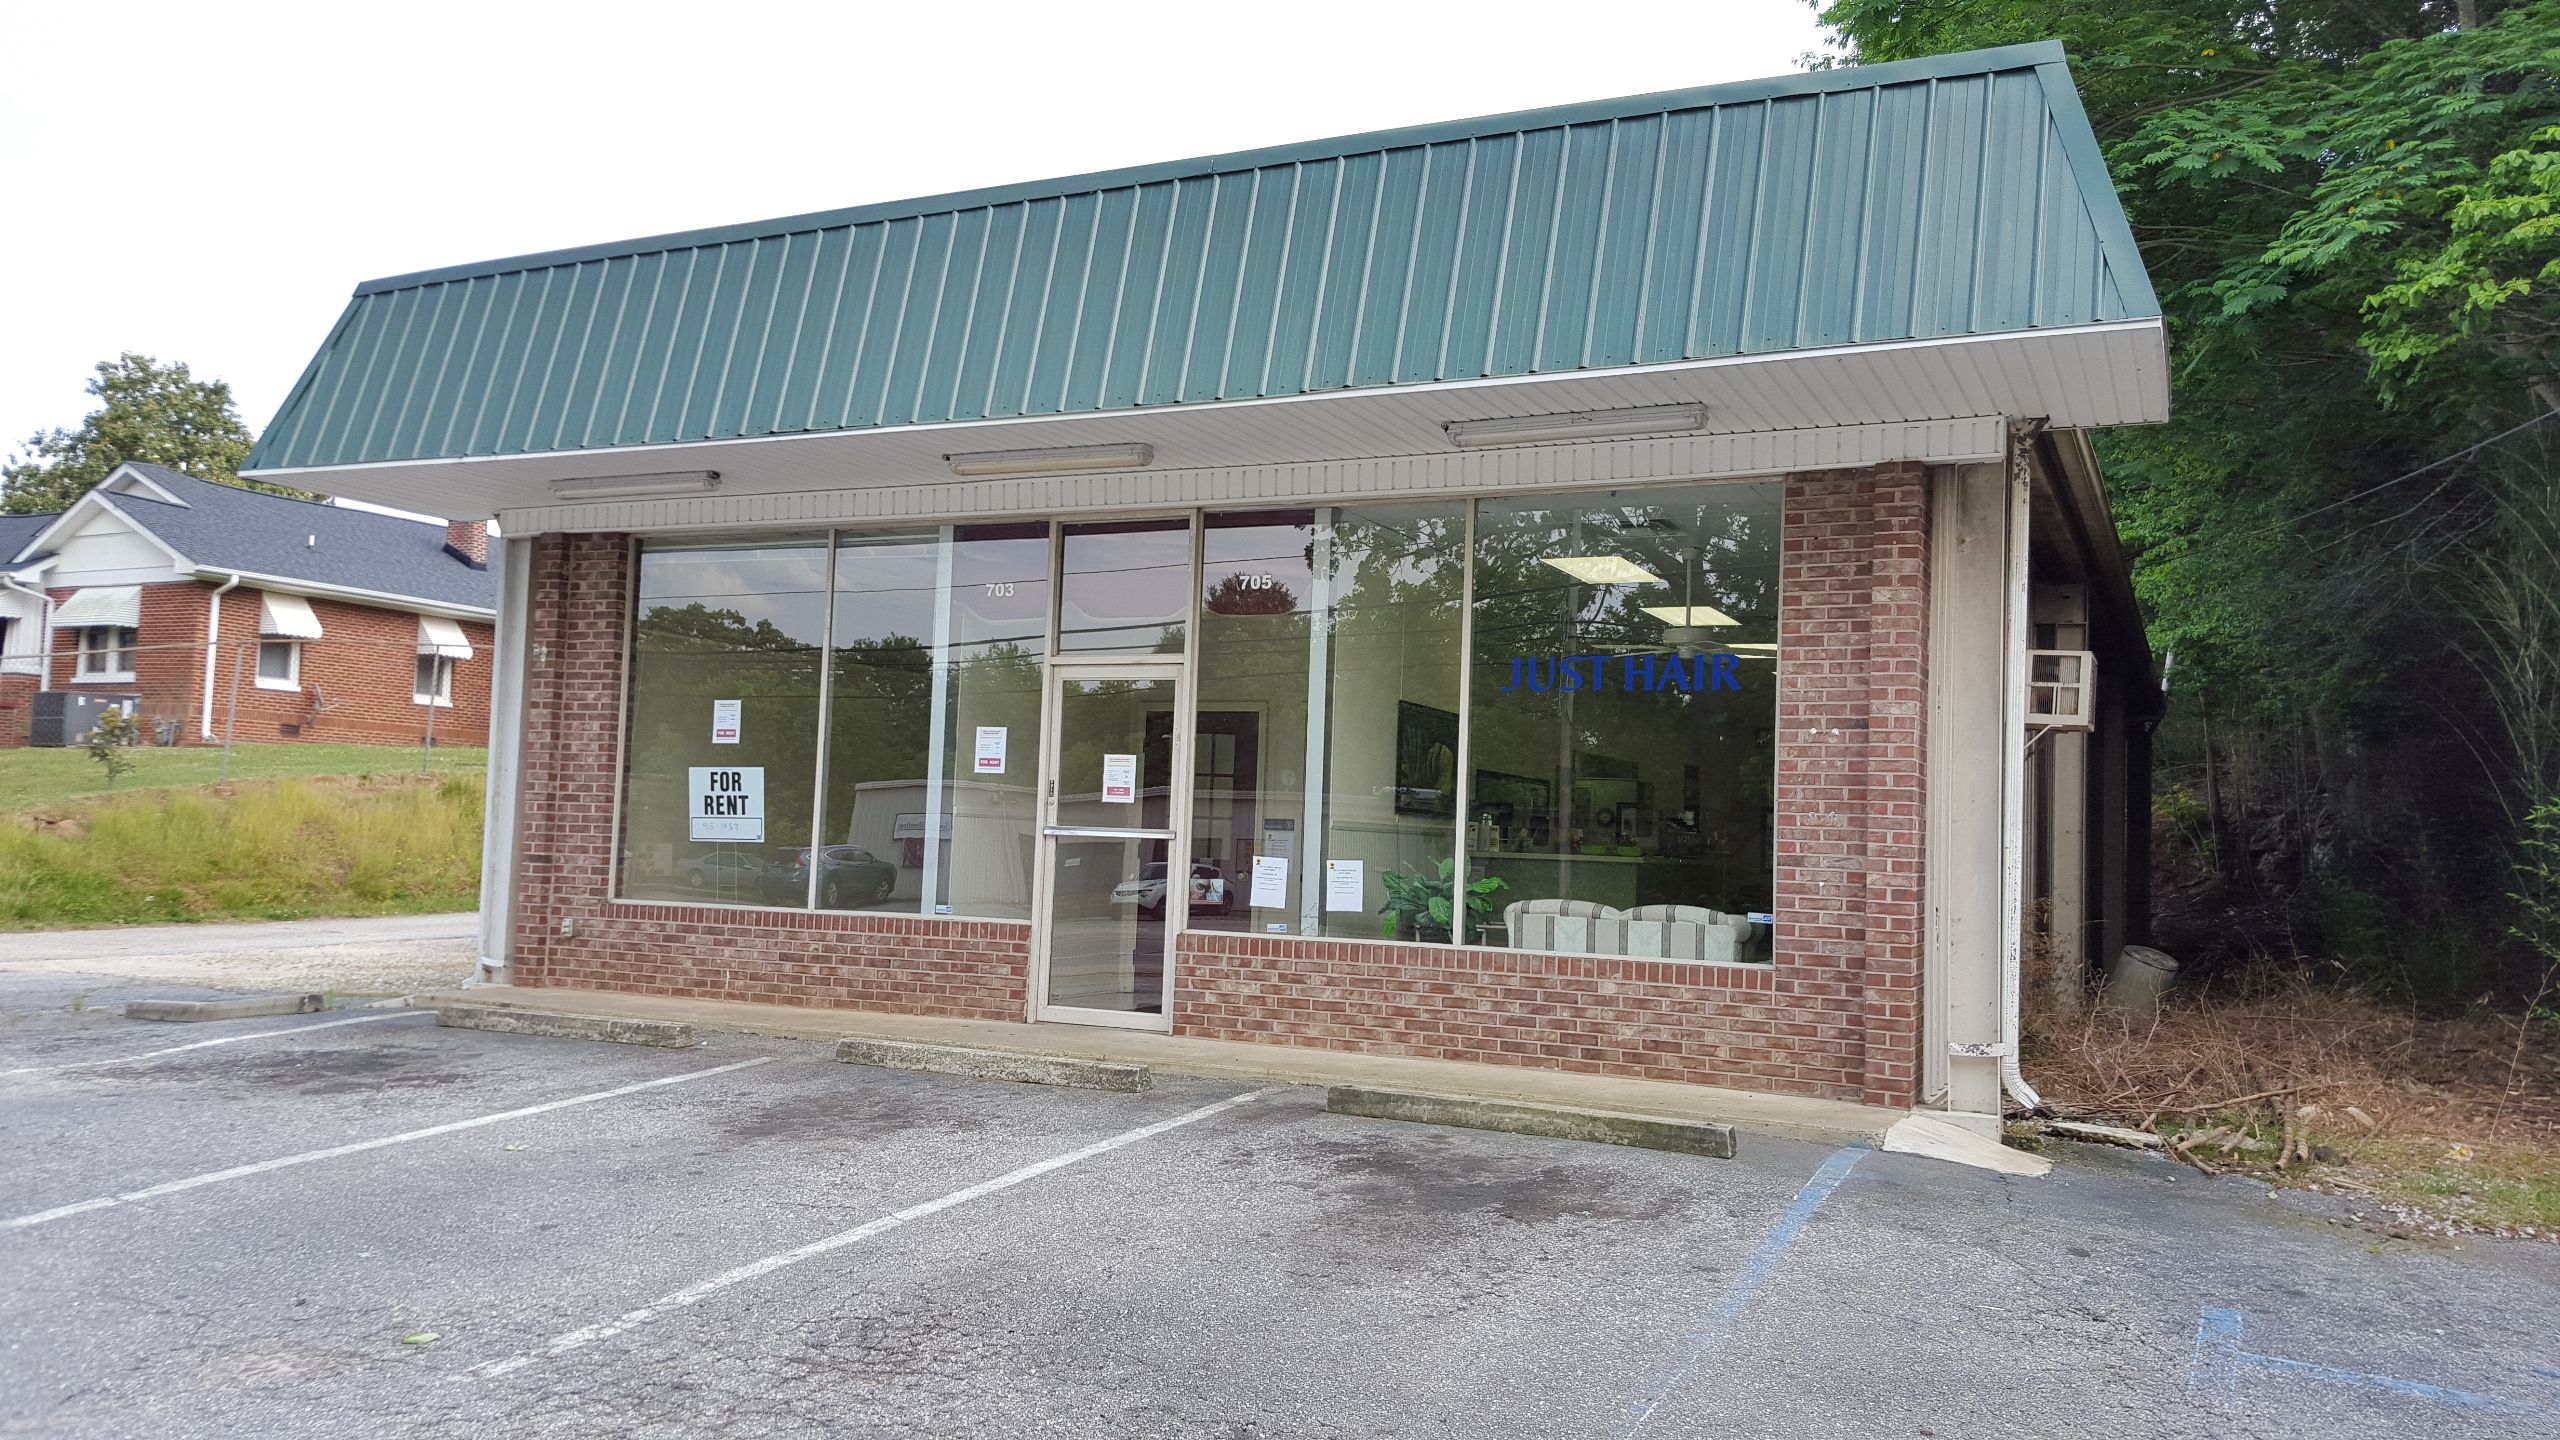 SOLD-2400sf Retail Investment Property in Piedmont